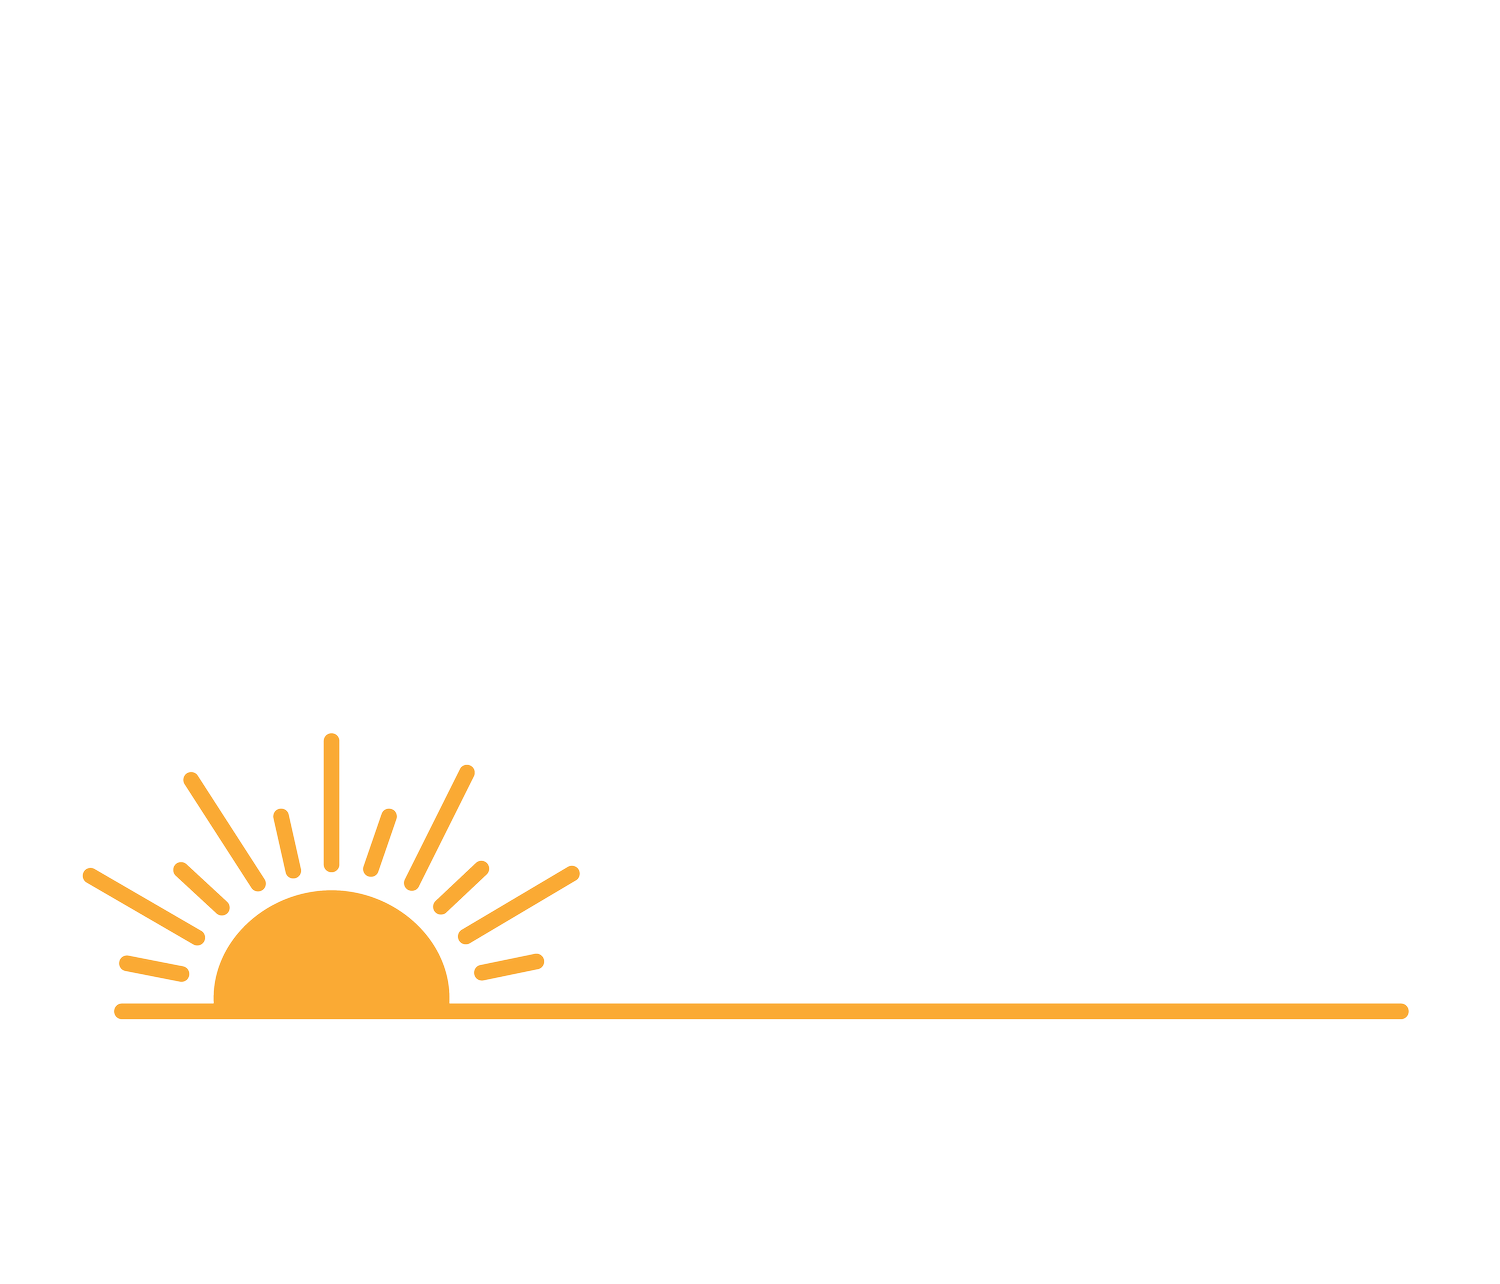 Ela Chapin for Vermont House